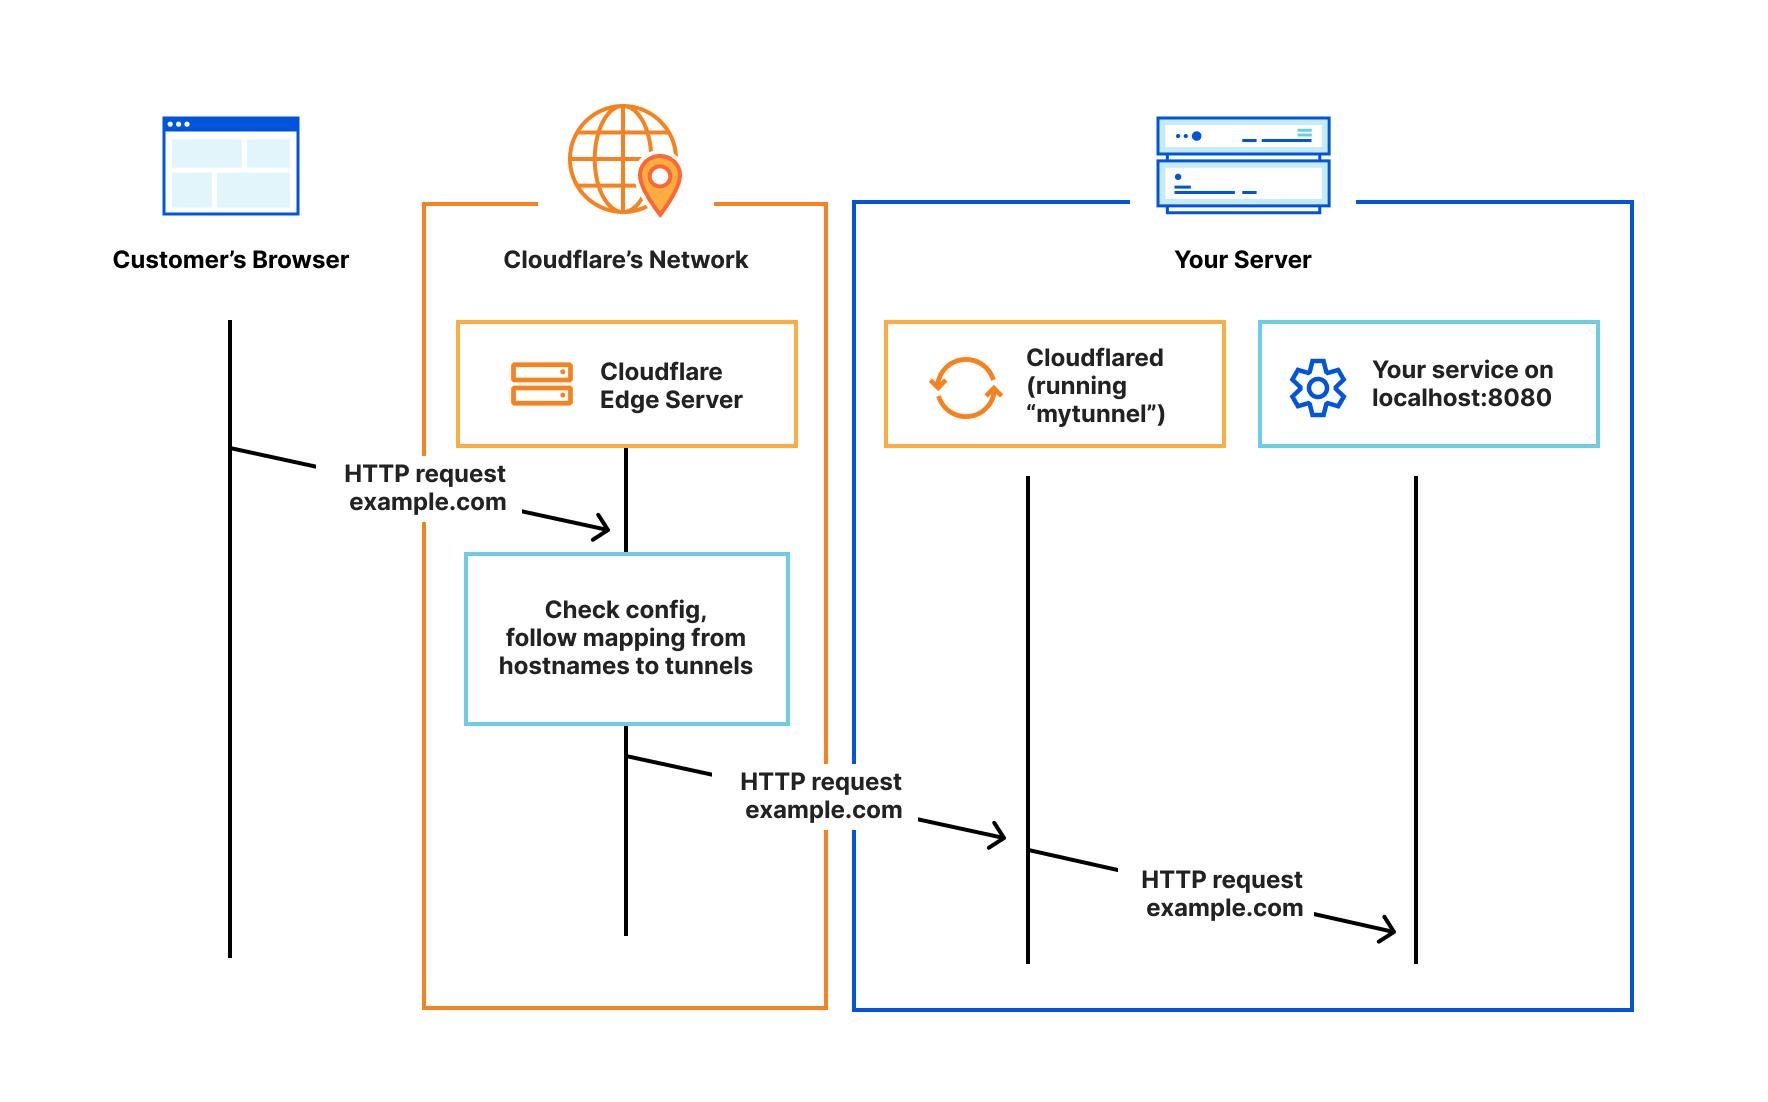 A diagram showing the flow of traffic from the client to the origin server through the cloudflare network